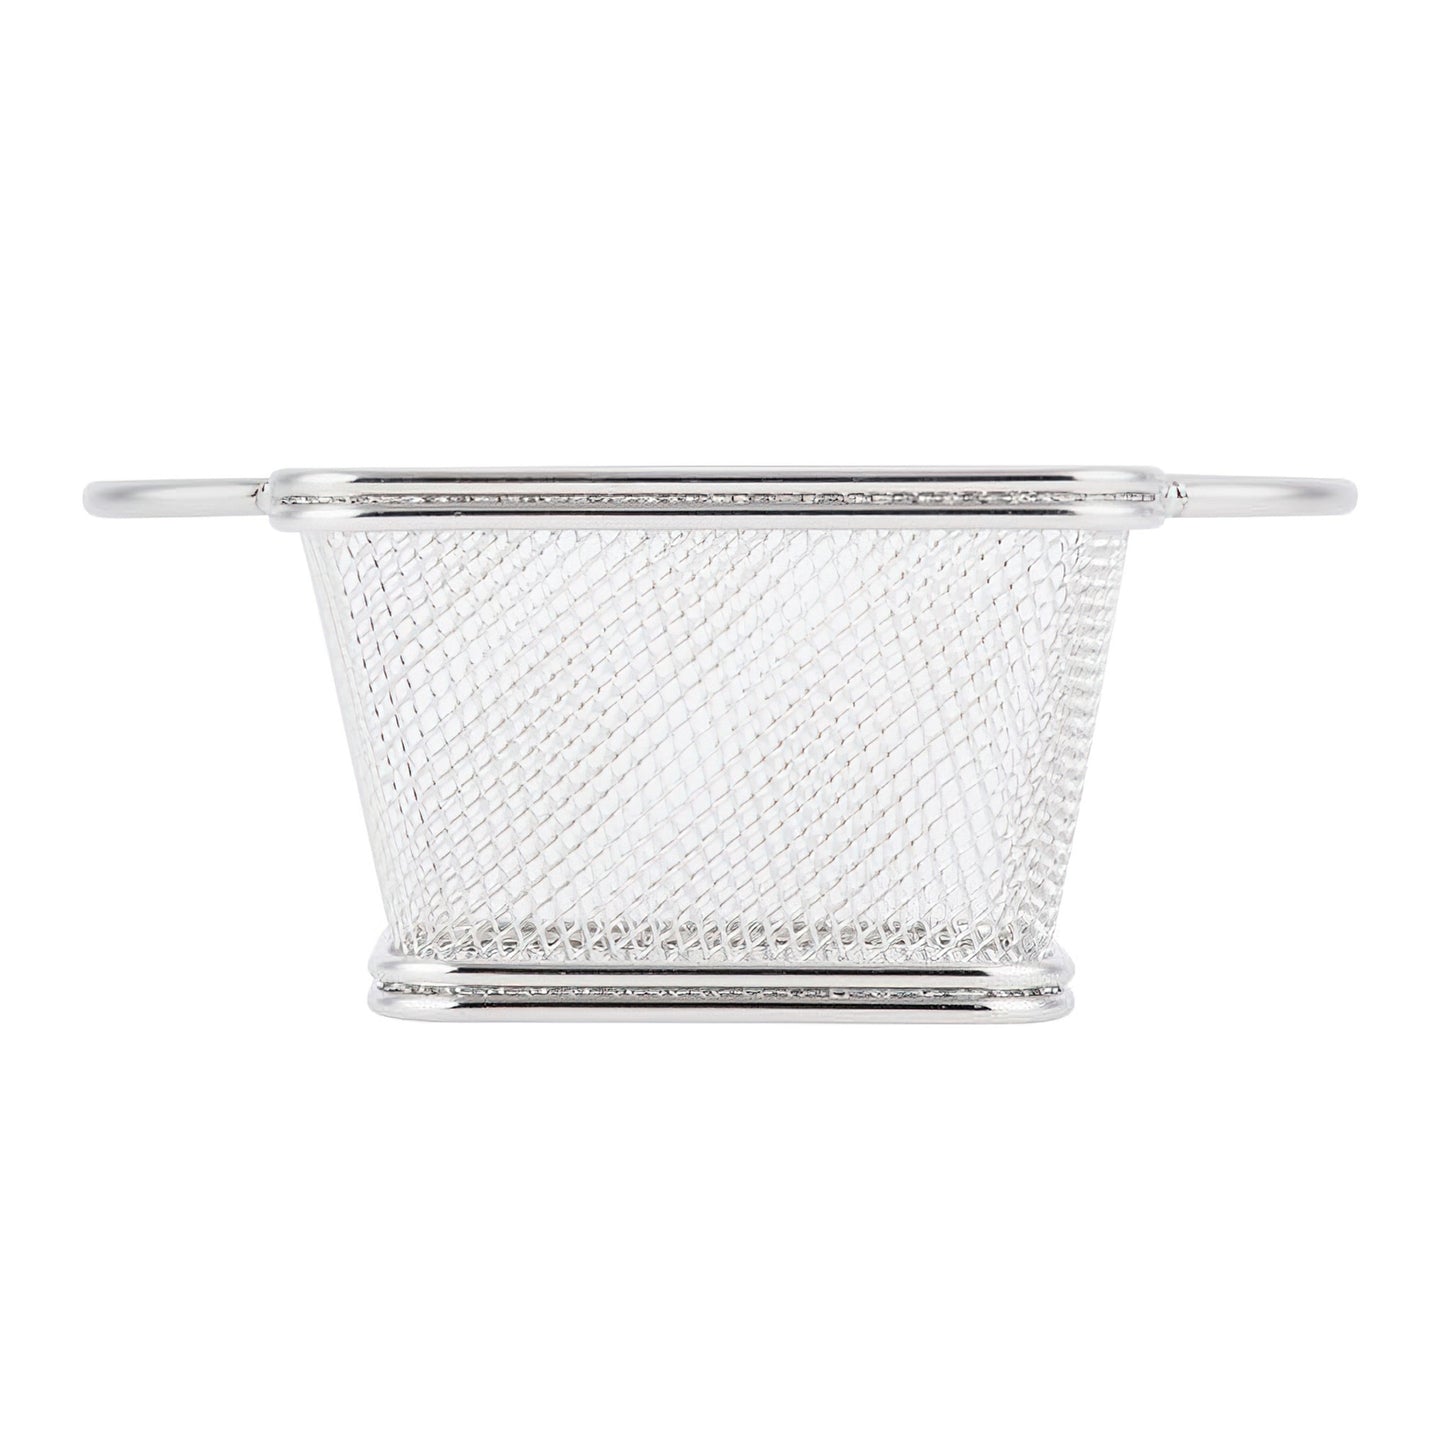 4" x 3.25" Single Serving Fry Basket w/ Round Handles 2.25" Tall (Fits 4-92065)